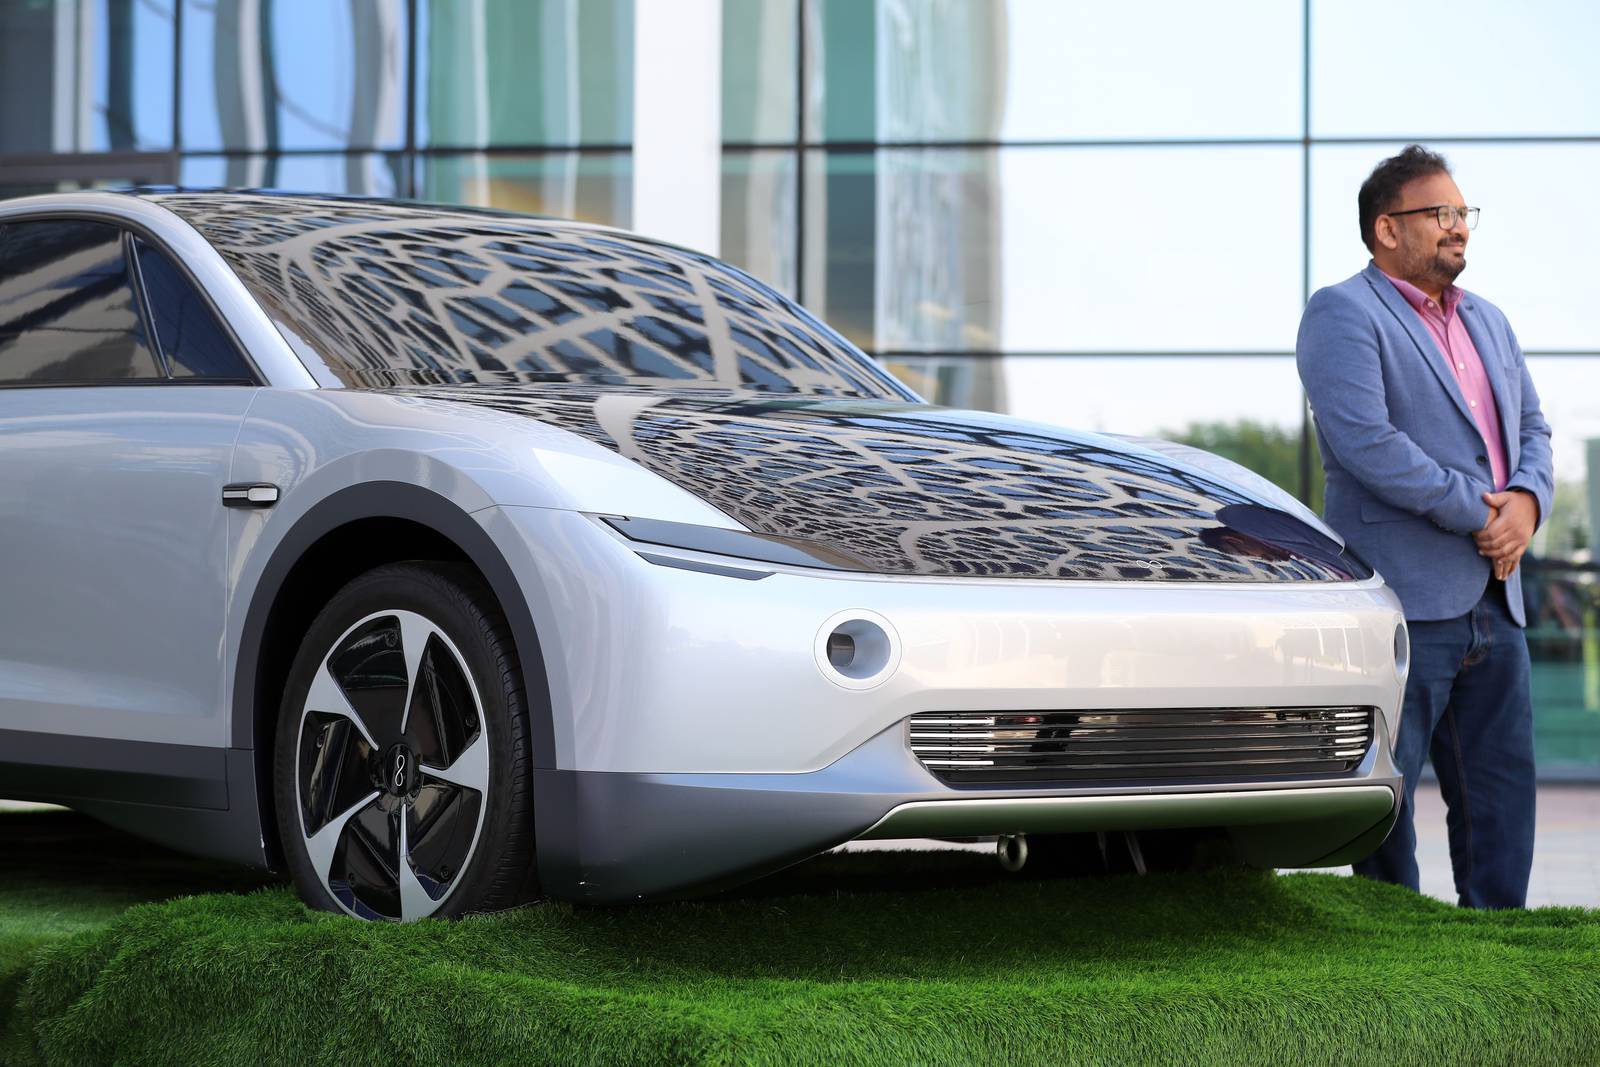 World’s first productionready solar car to hit UAE roads in 2023